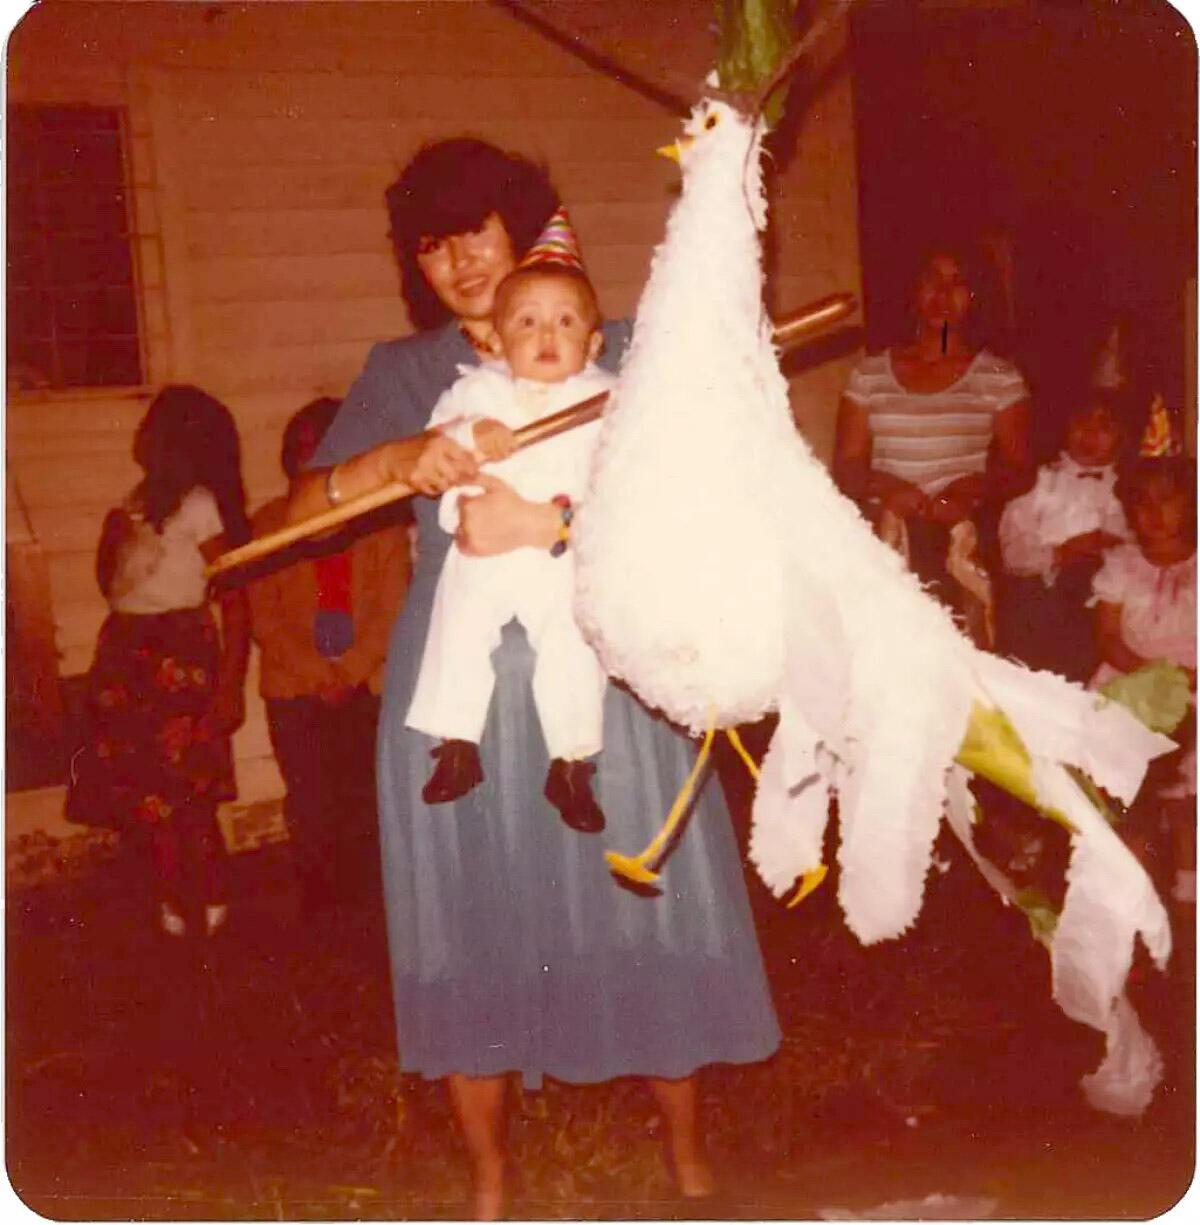 Gustavo and mom as she holds a stick near a large bird-shaped figure.